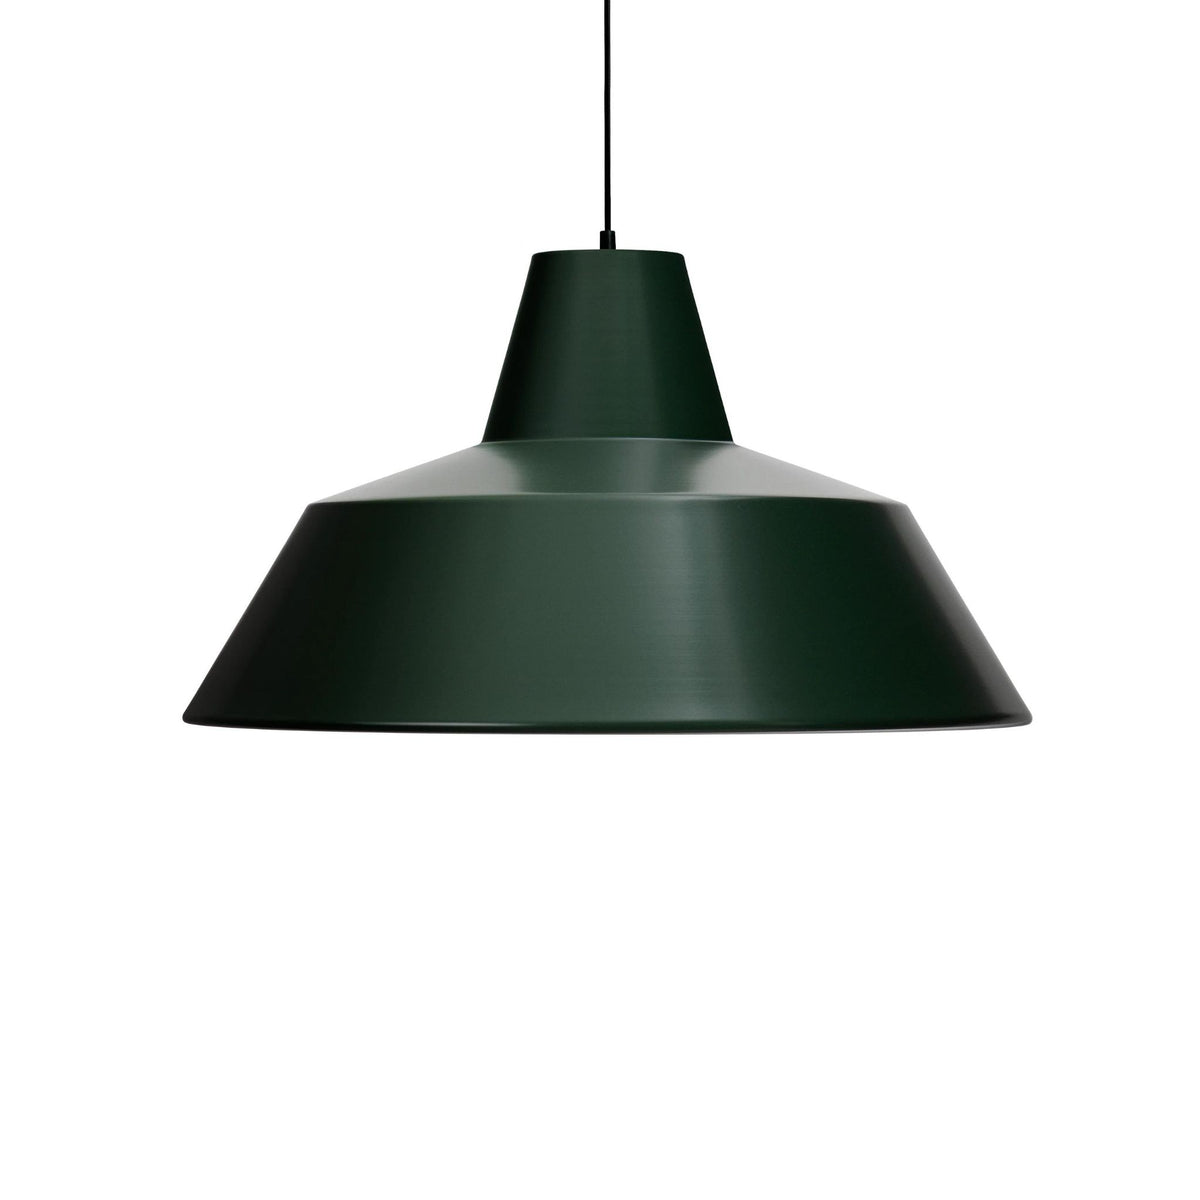 Made by Hand Workshop W5 Pendant in Racing Green by A Wedel Madsen